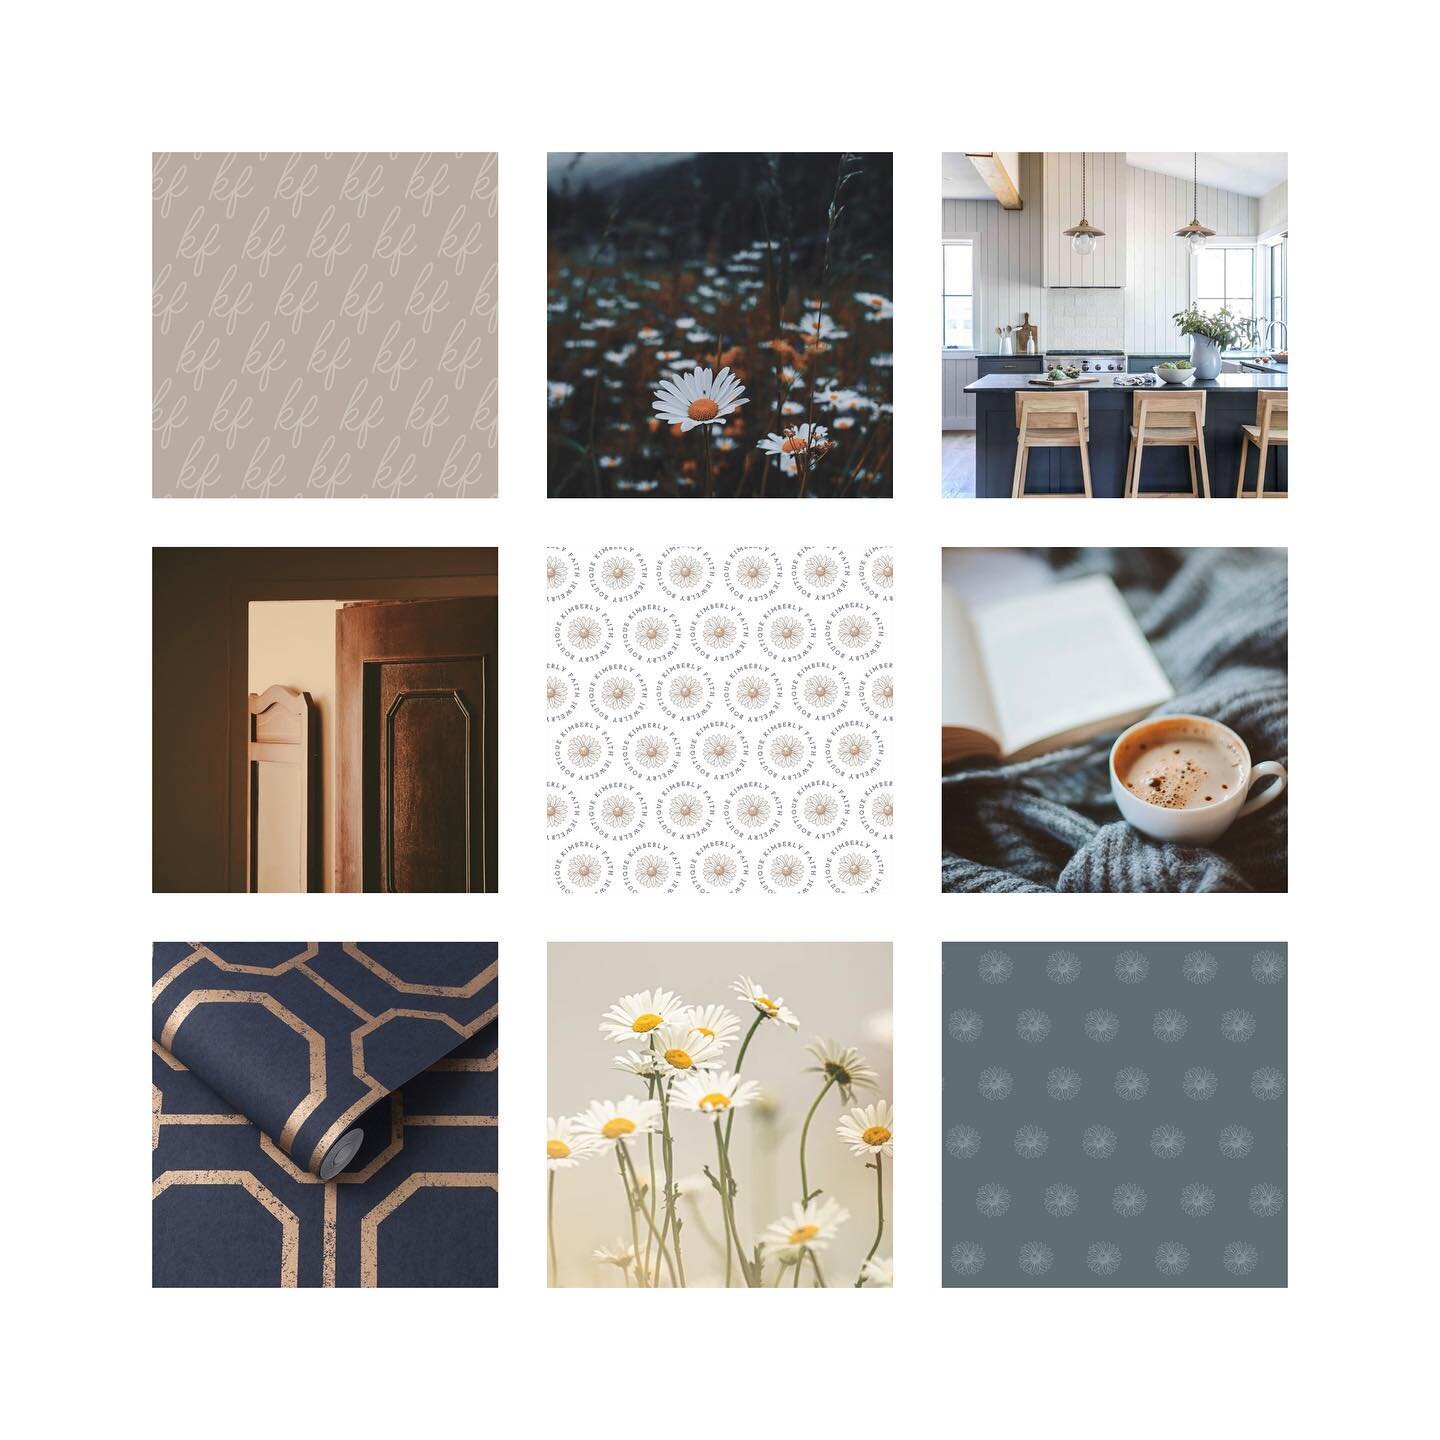 Cozy, cool, neutral and natural. 
Inspiration images and patterns made for @kfjewelryboutique rebrand.

What do you think? Kind of gives me cozy fresh rainy day vibes like the weather in Windsor this week. Do you agree?

(Swipe)
Submark as a stamp. 
